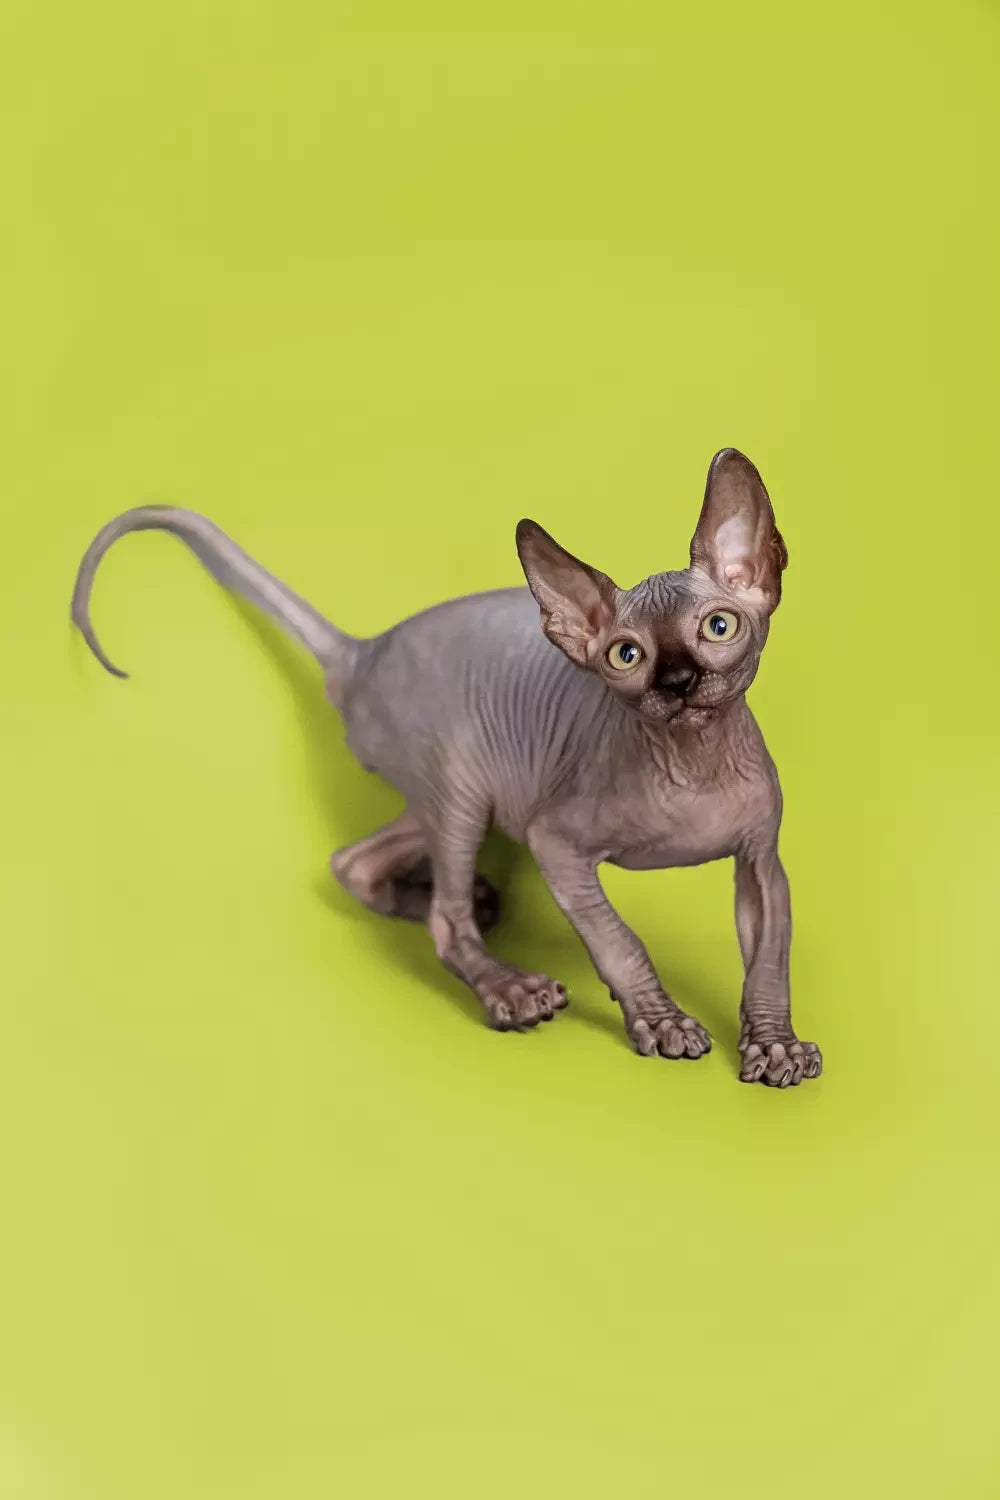 Sphynx Cat Health Check: The Importance of Vet Visits